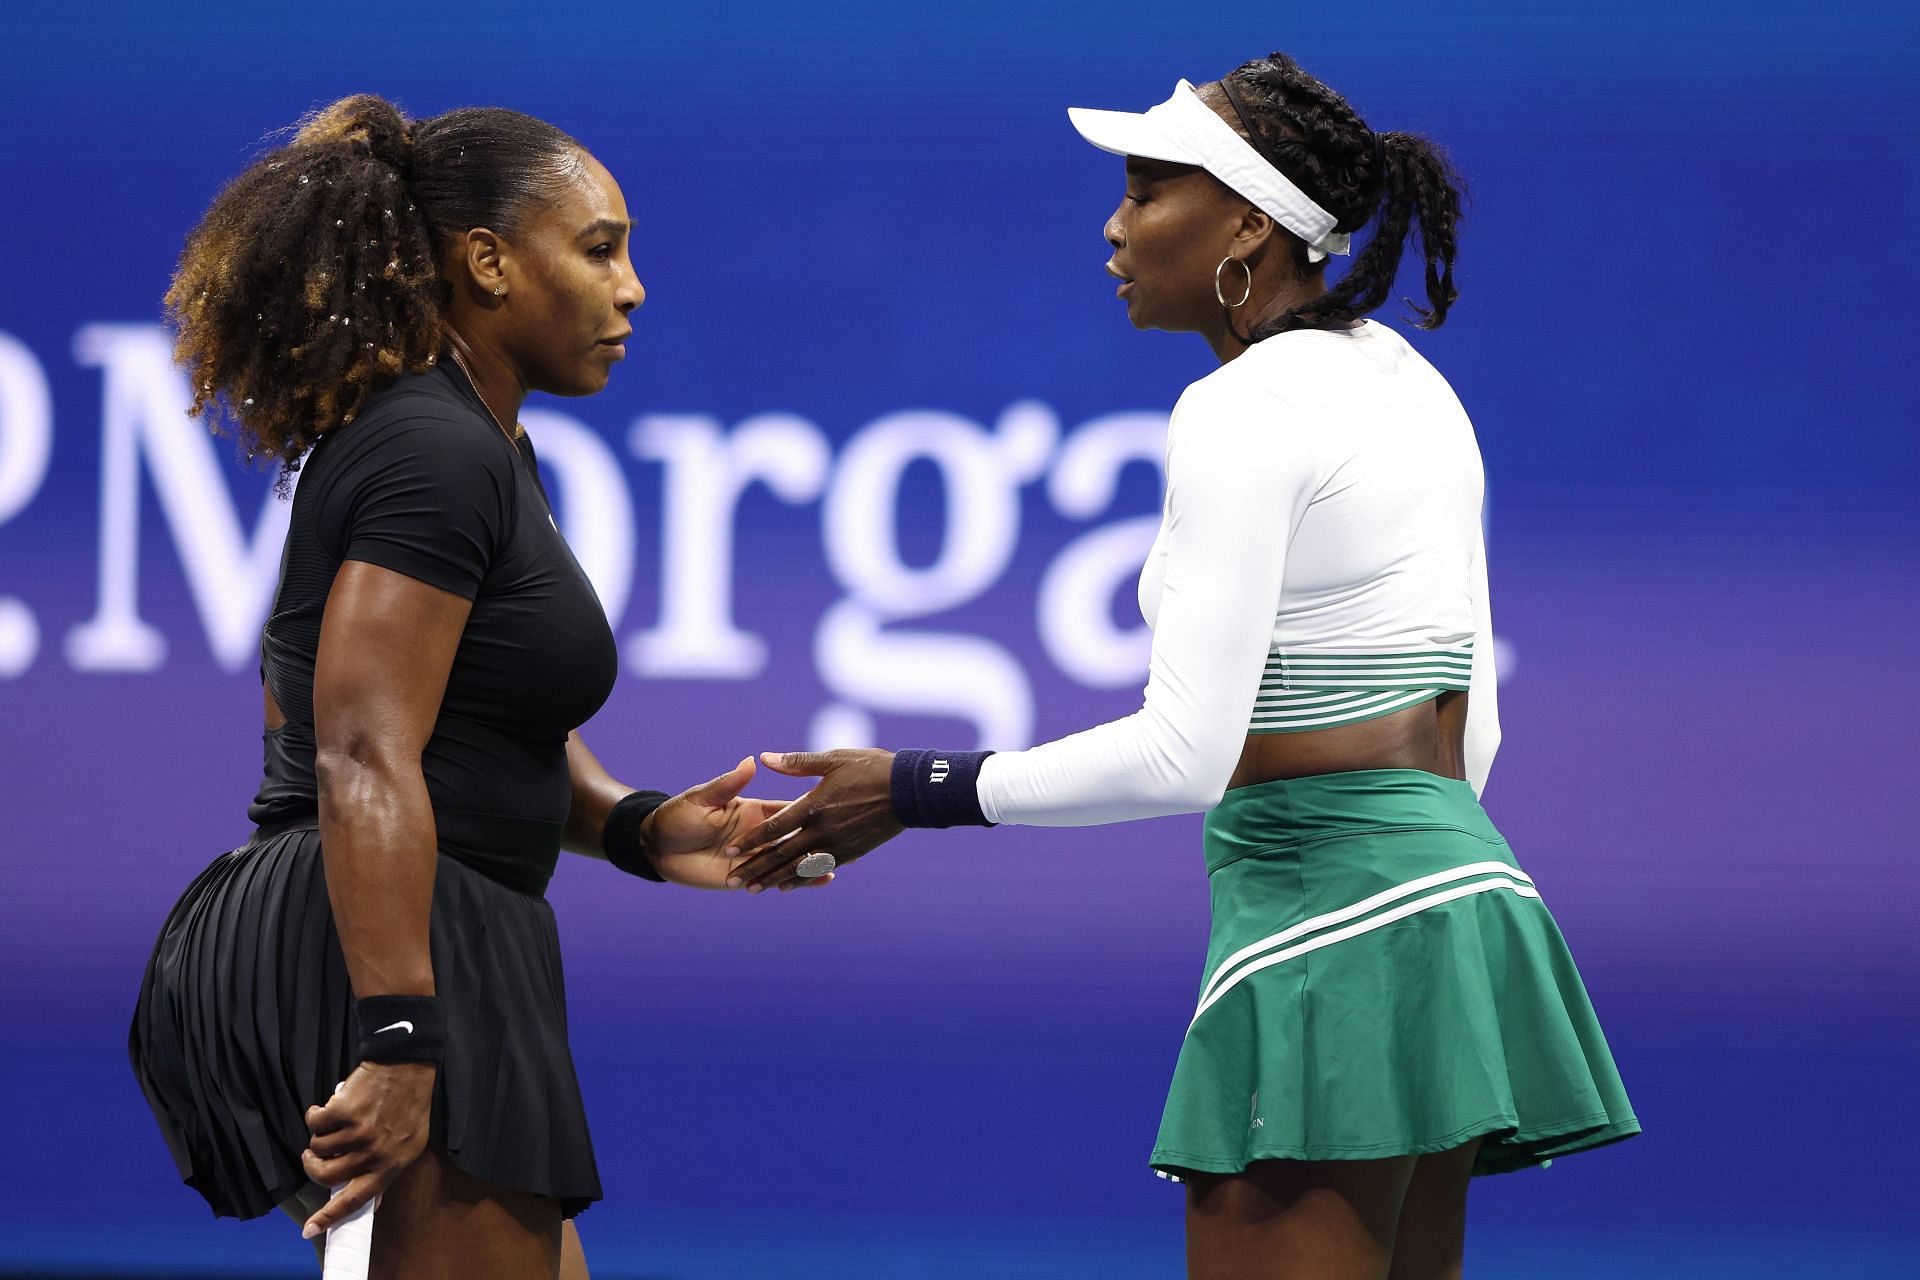 Serena Williams and Venus Williams in action at the 2022 US Open.